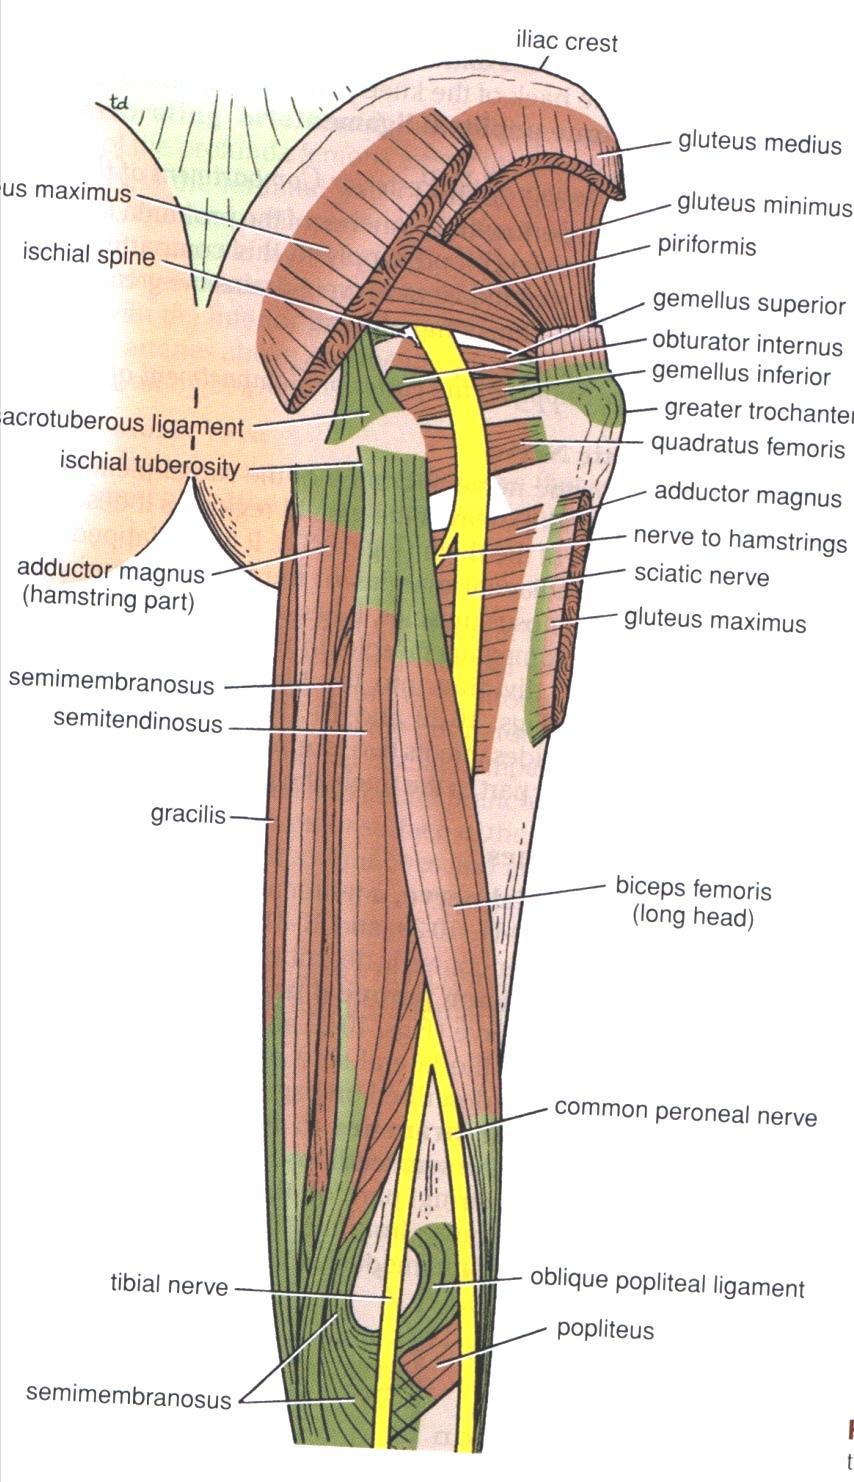 Hamstring muscles These are: Semi-membranosus